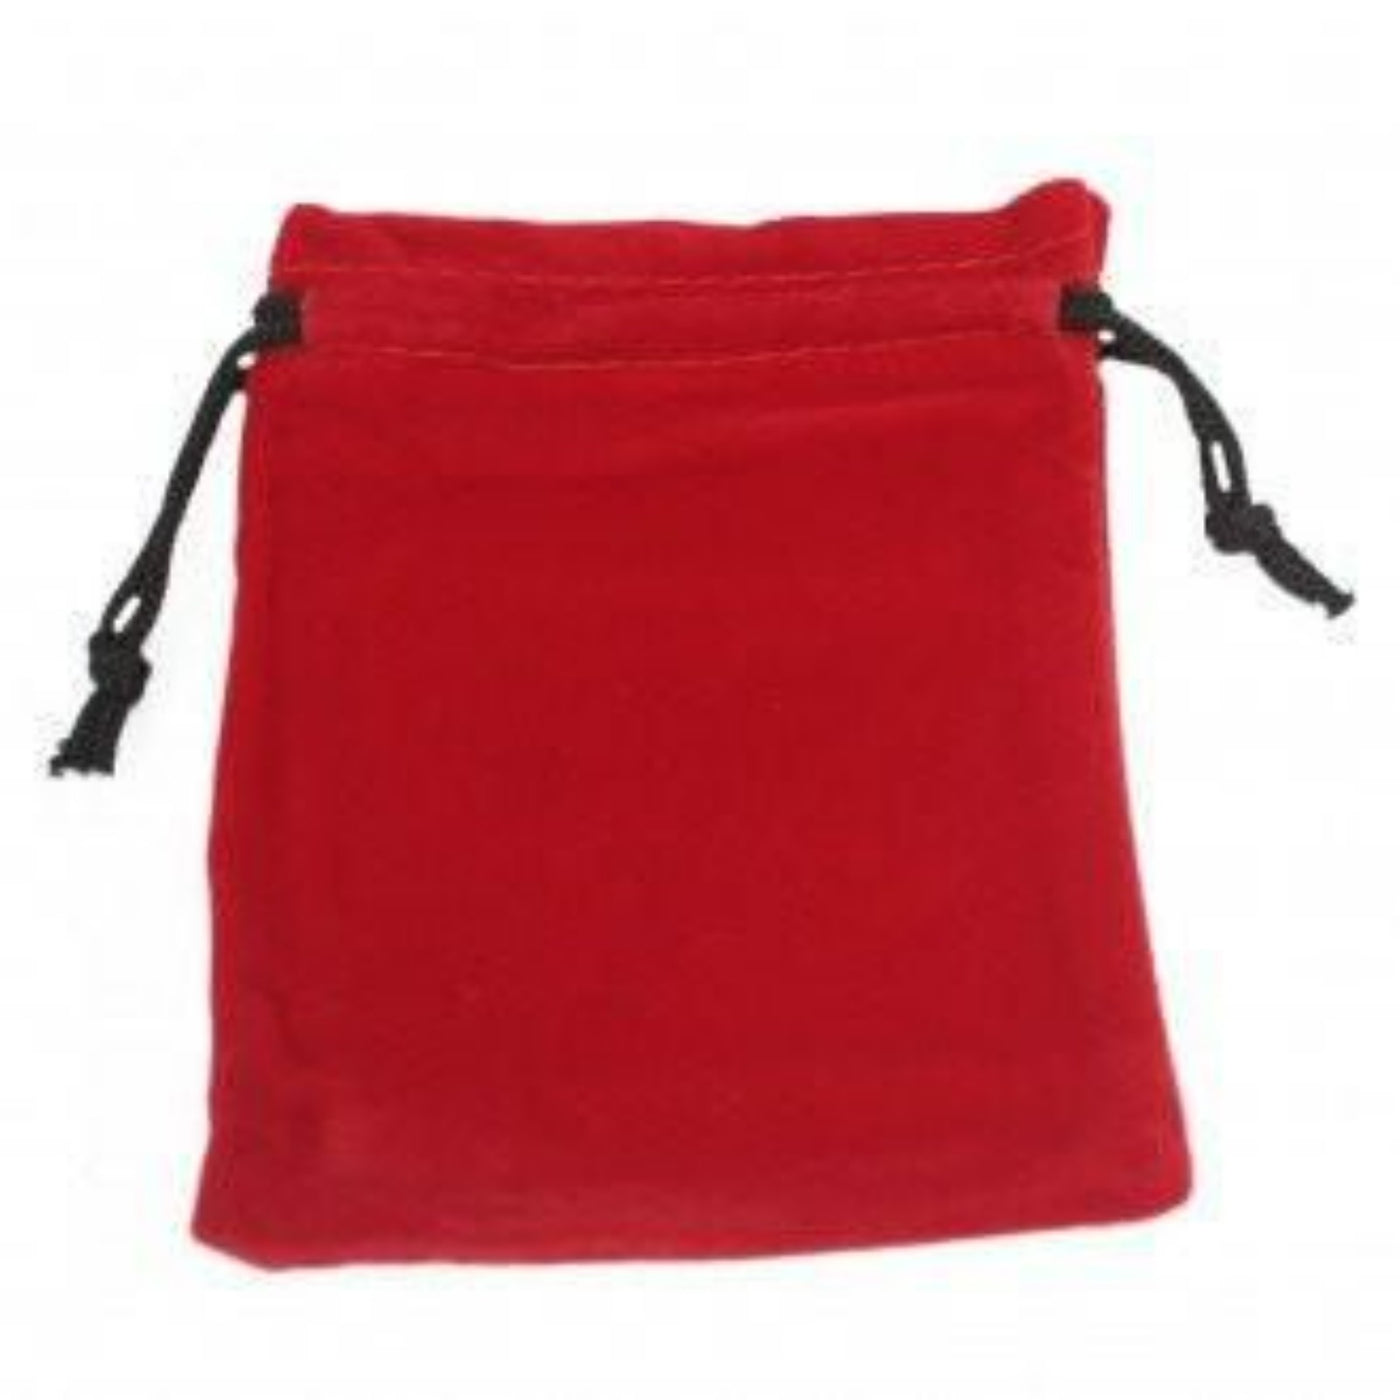 3 X Quality Red Velvet Jewellery Pouch.